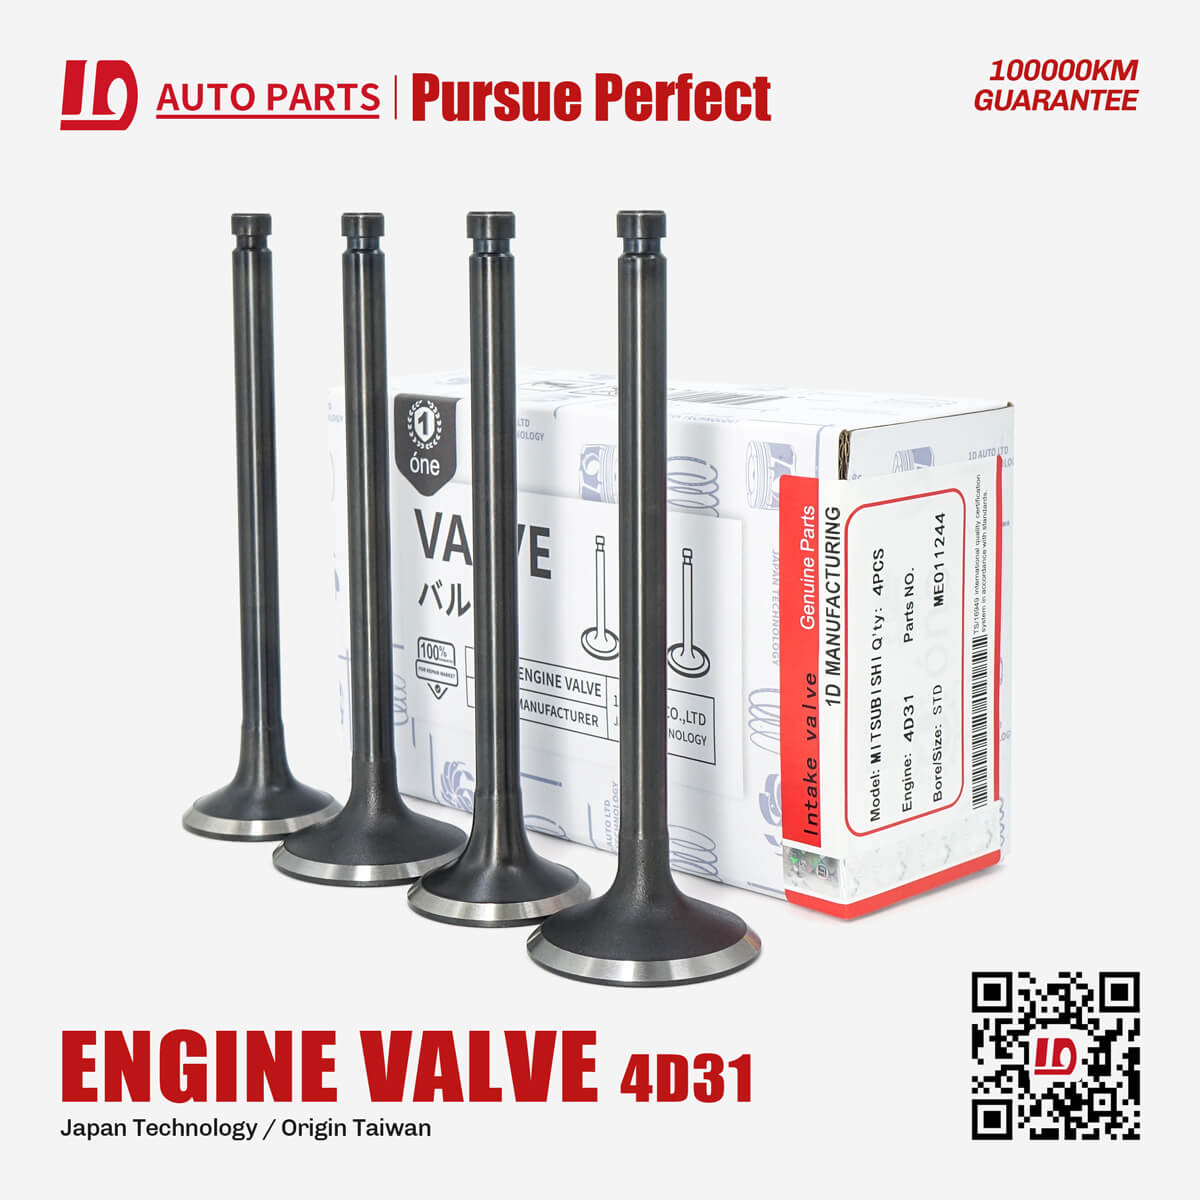 Engine valves ME011244 intake and ME011245 exhaust valves For engine valve 4D31